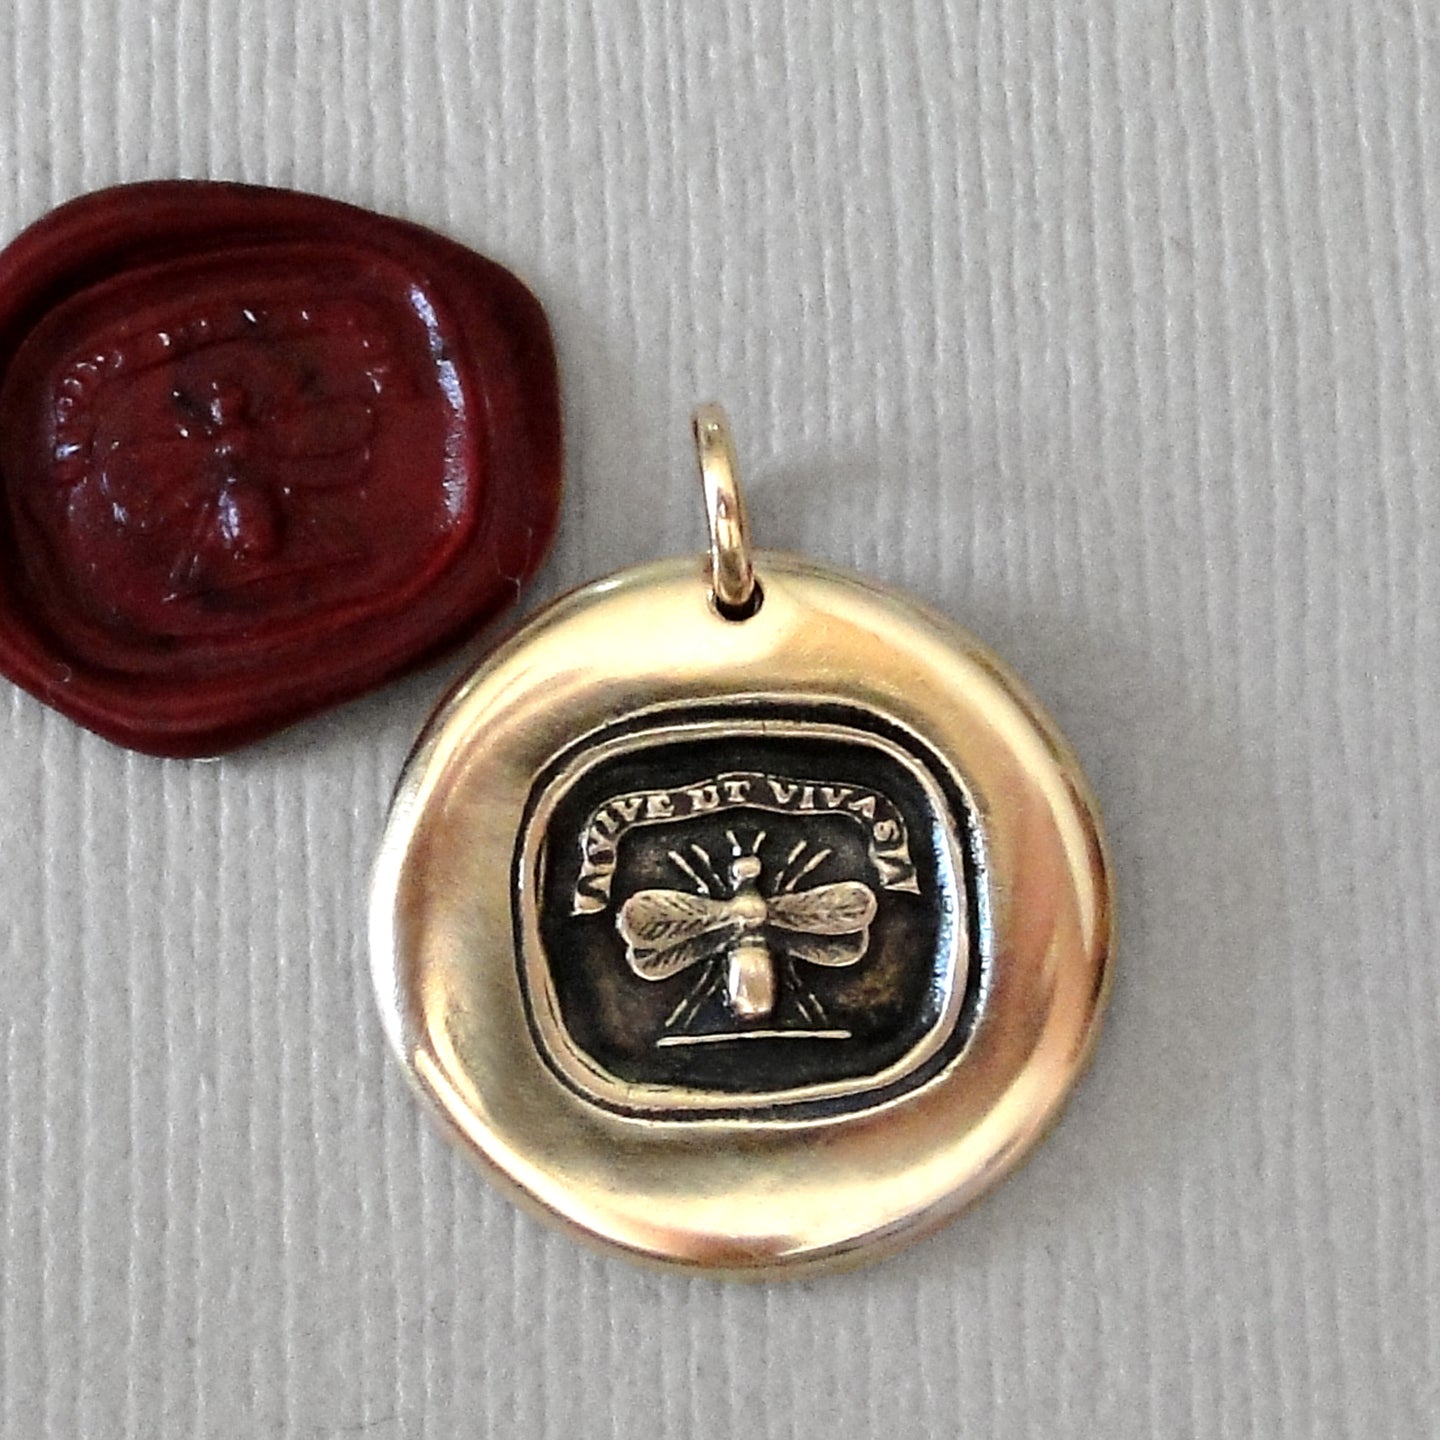 Bee Wax Seal Pendant - Live Life To The Fullest - antique wax seal charm jewelry with Latin motto